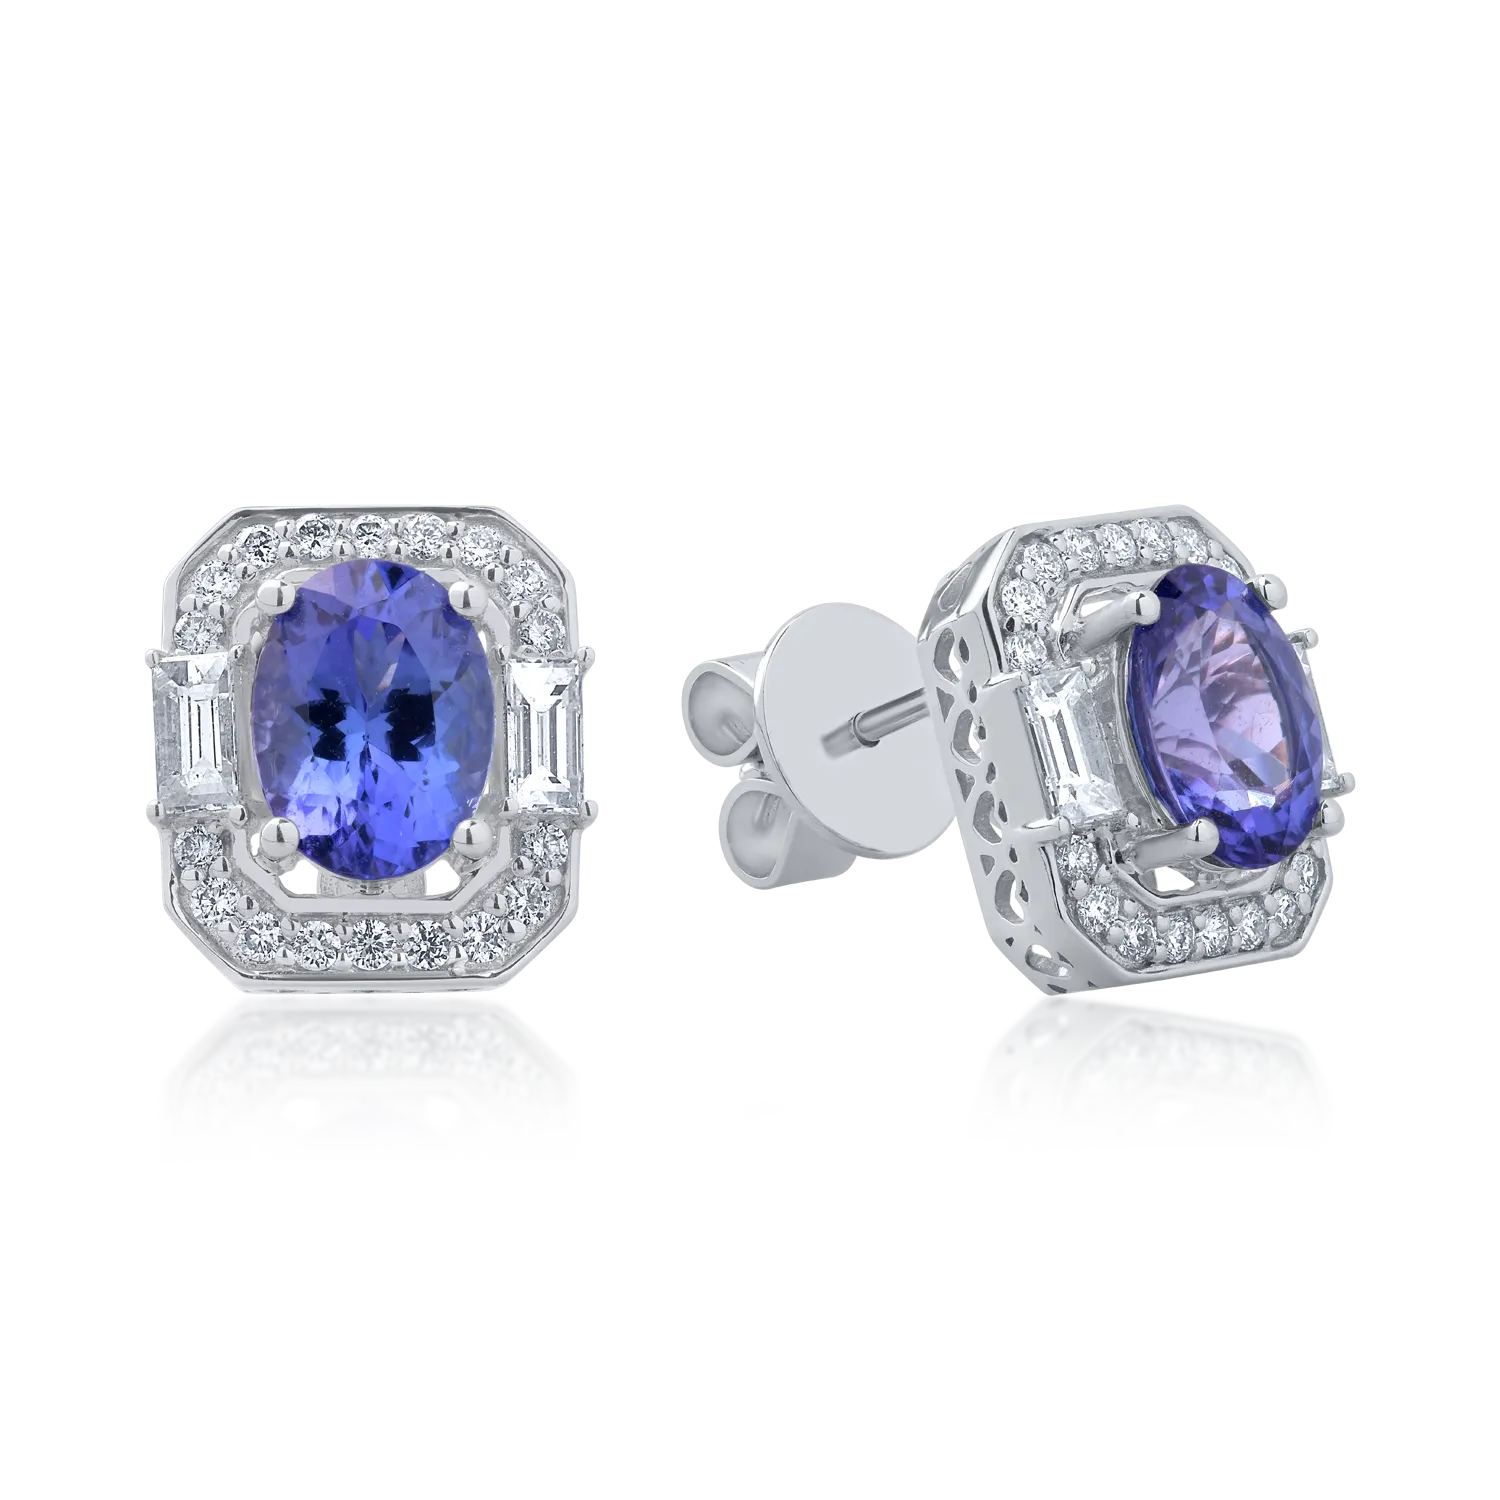 18K white gold earrings with 2.74ct tanzanites and 0.731ct diamonds